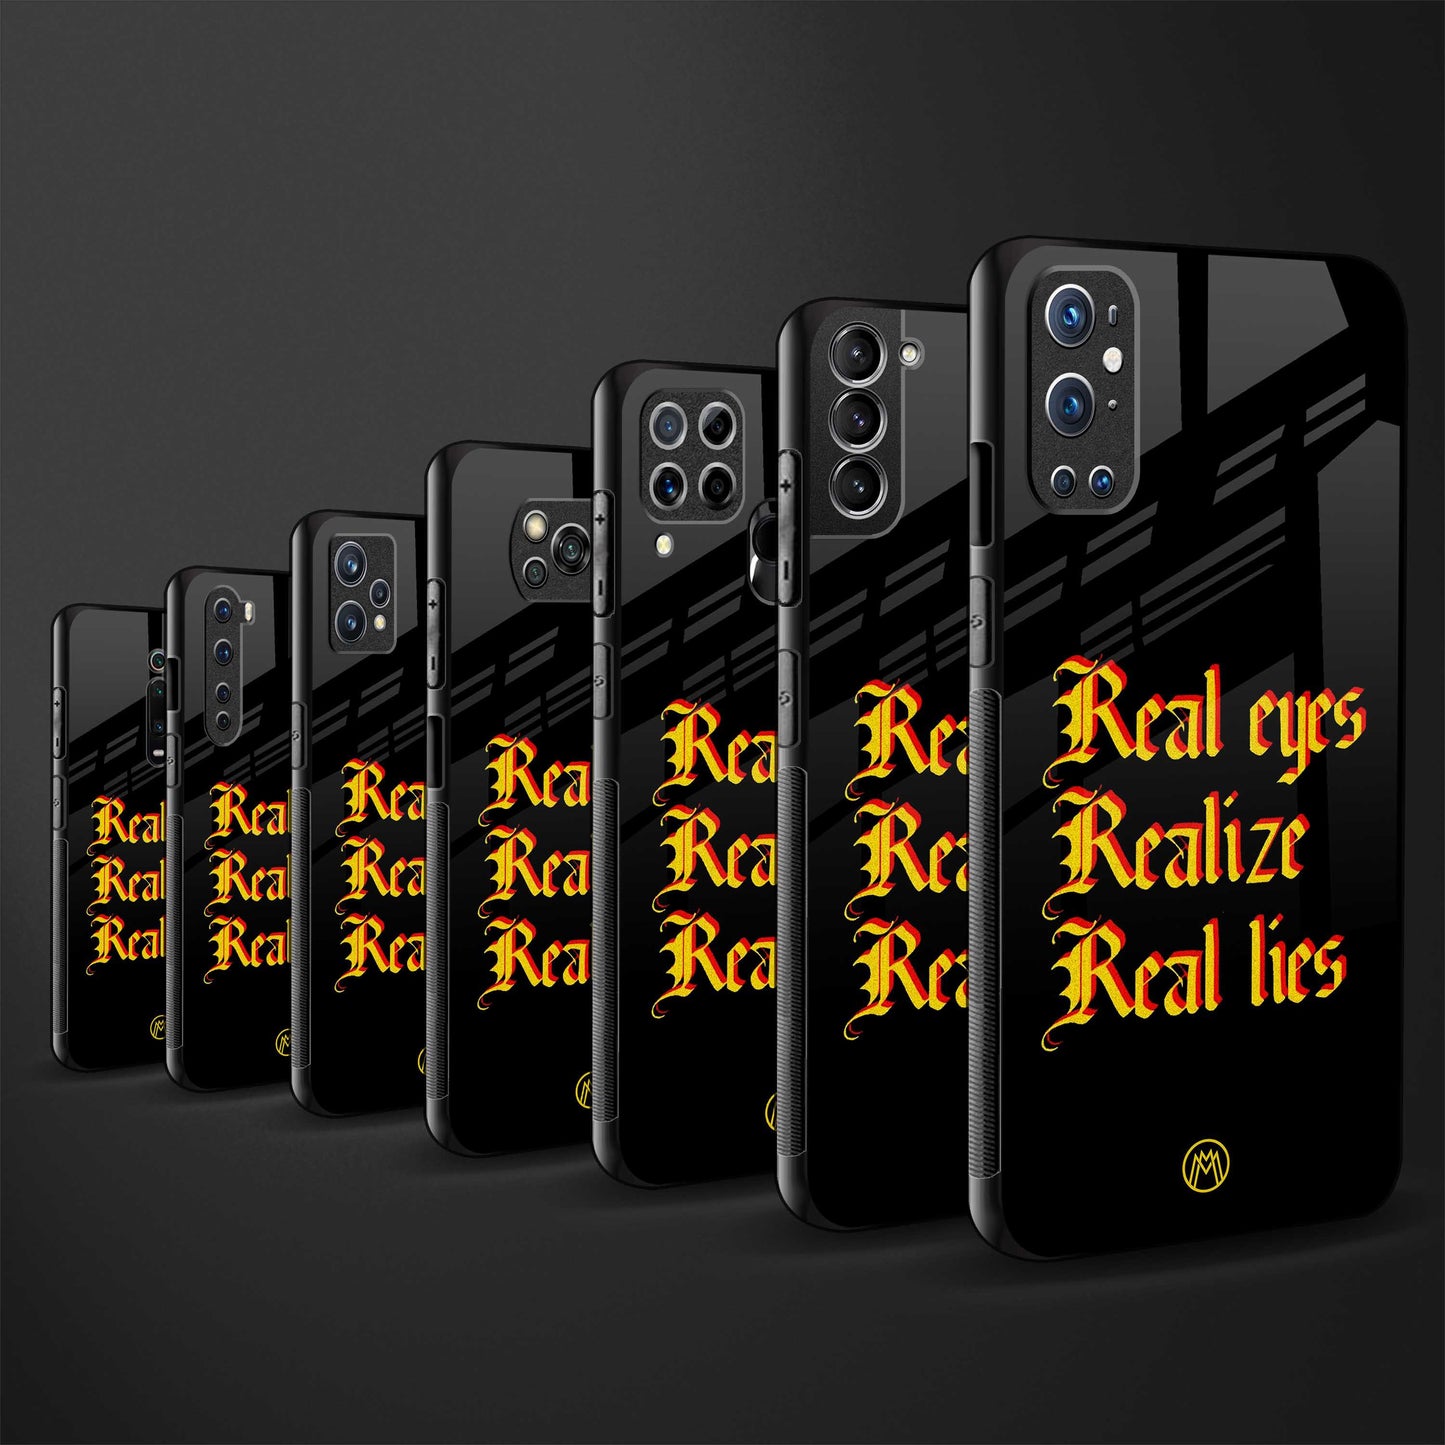 real eyes realize real lies quote glass case for iphone 13 mini image-3